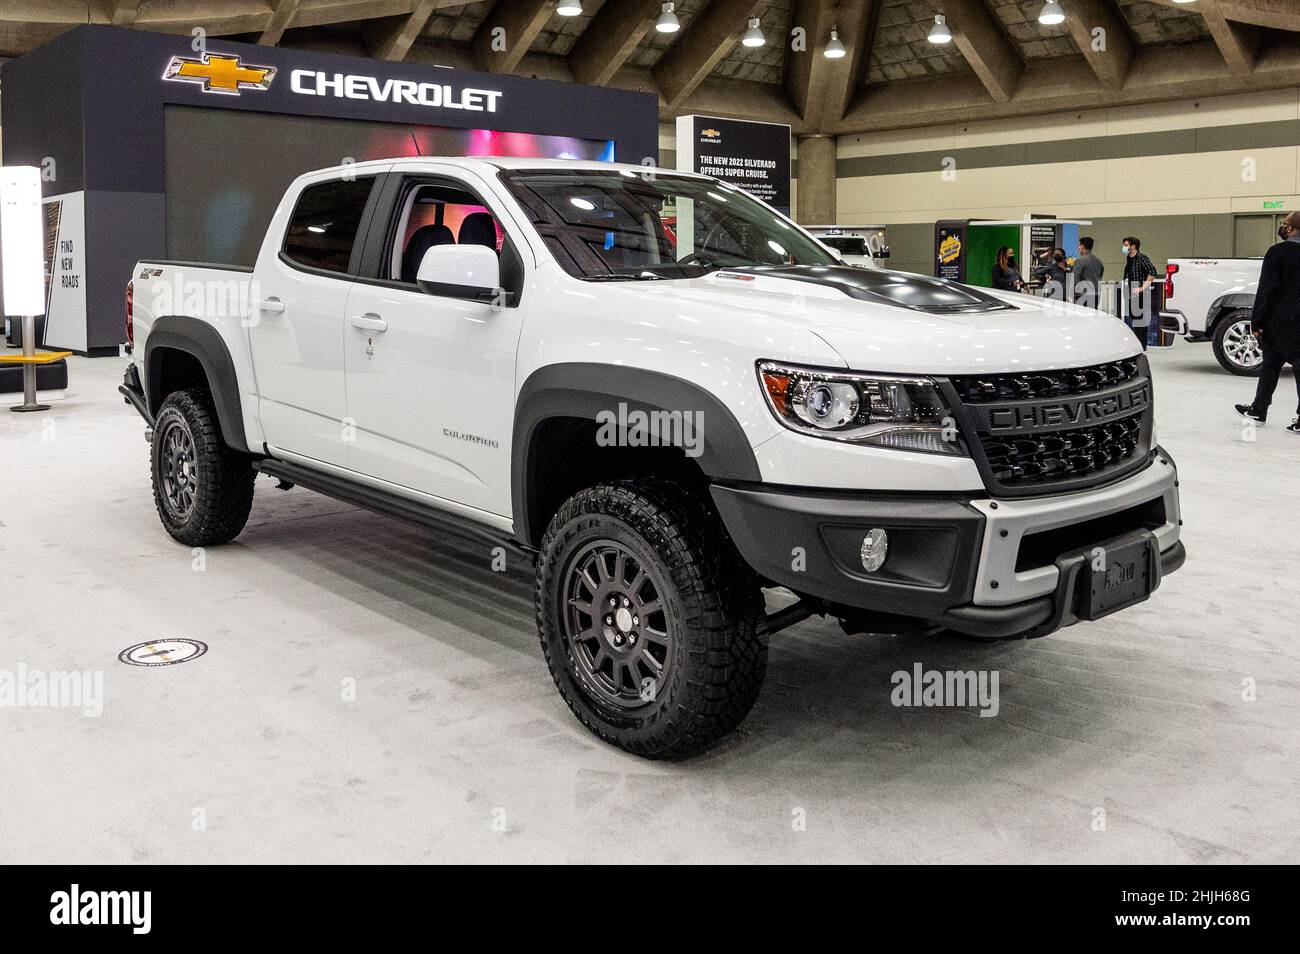 Baltimore, United States. 28th Jan, 2022. January 28, 2022 - Baltimore, MD, United States: A 2022 Chevrolet Colorado ZR2 Bison at the Maryland Auto Show. (Photo by Michael Brochstein/Sipa USA) Credit: Sipa USA/Alamy Live News Stock Photo